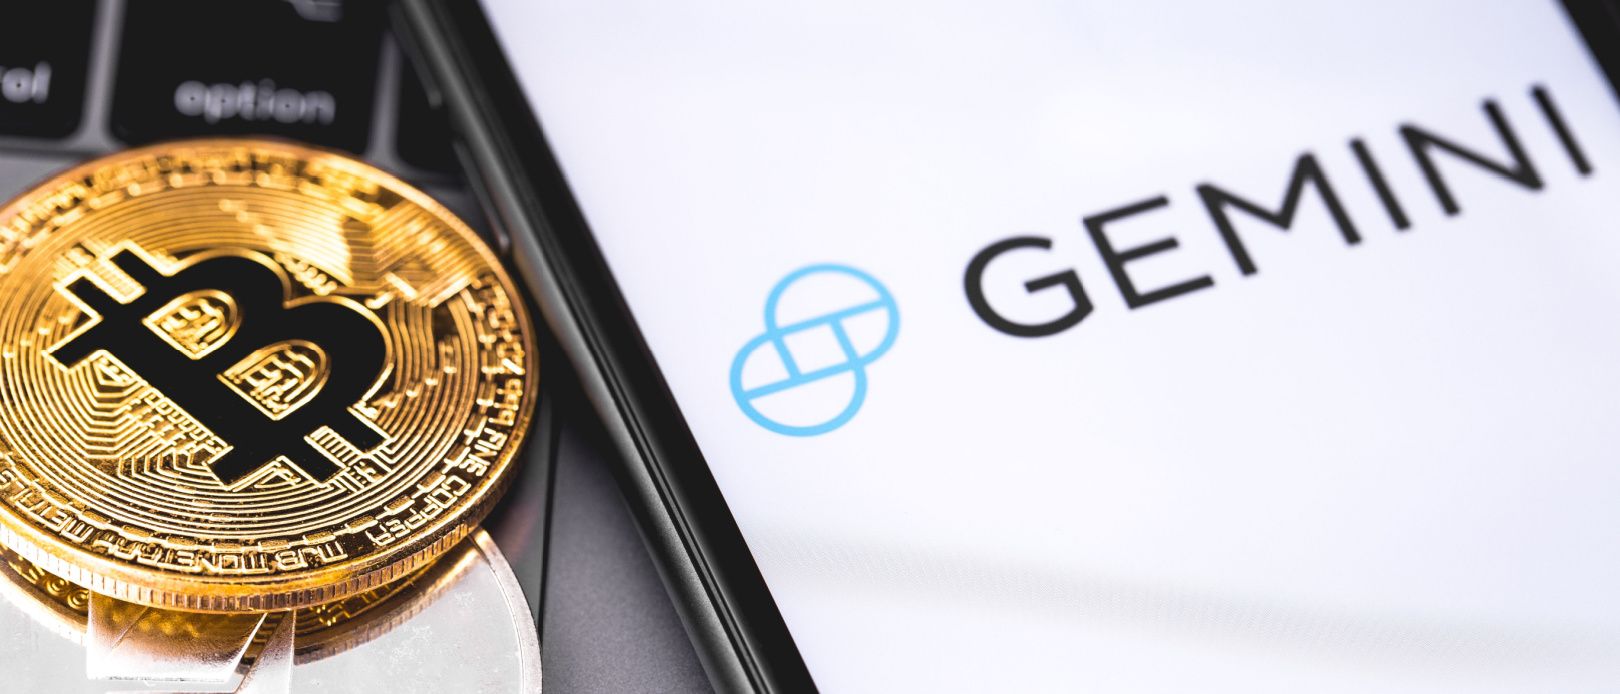 Gemini Crypto Currency Exchange Stock Photos and Pictures - Images | Shutterstock